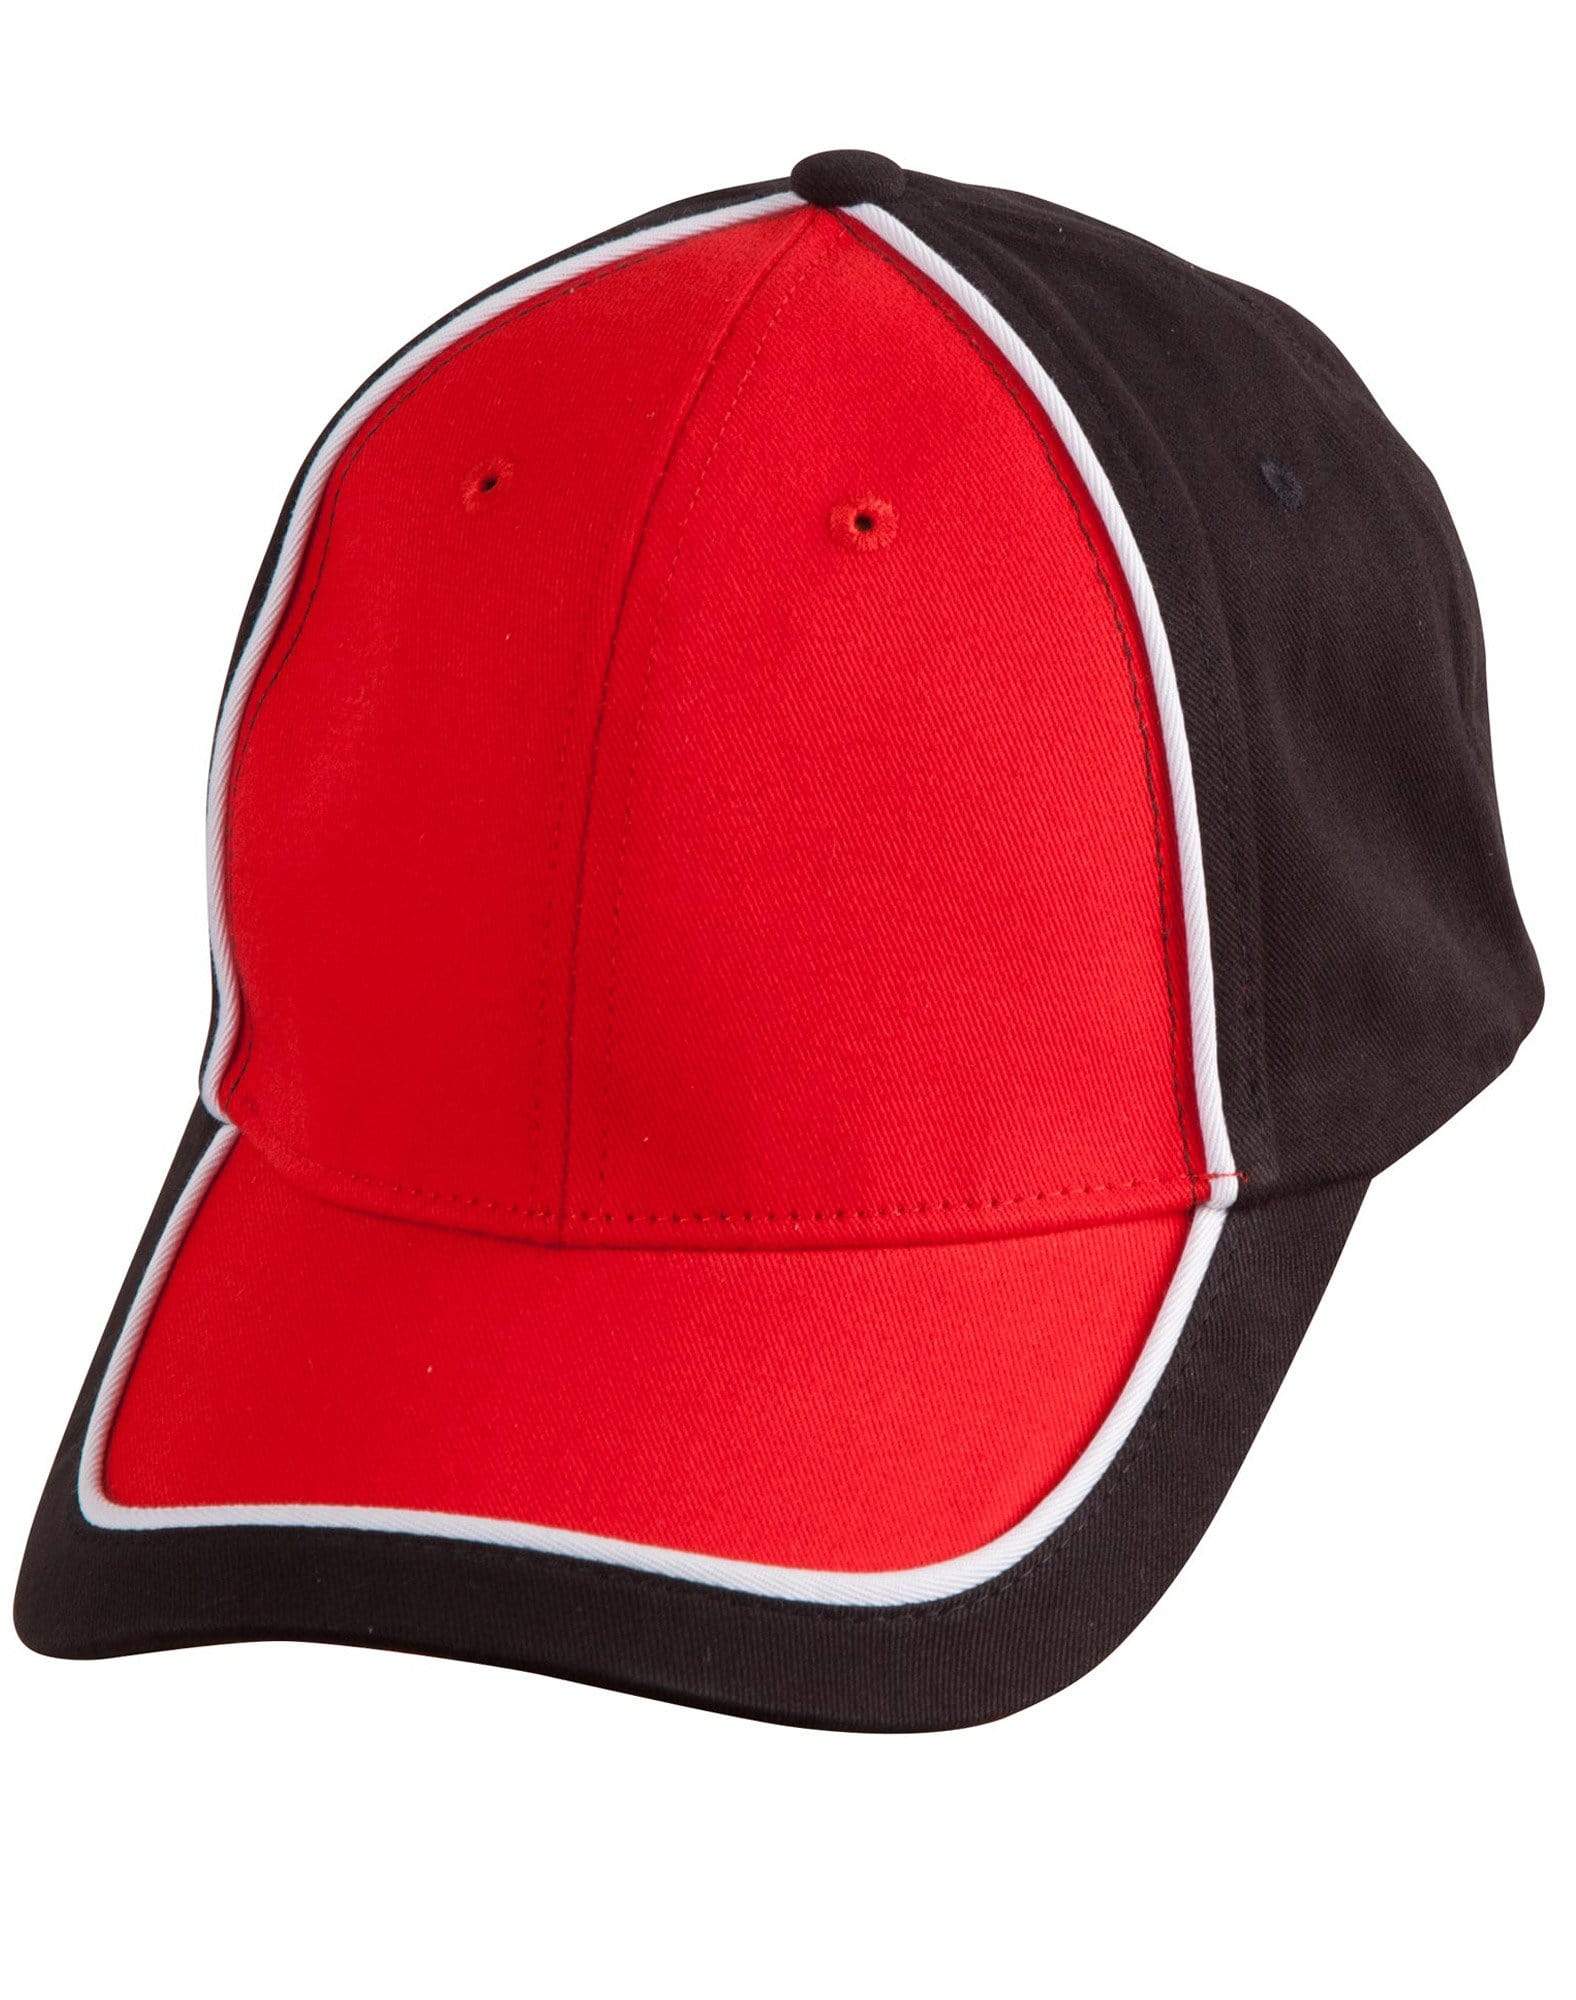 Winning Spirit Active Wear Black/White/Red / One size ARENA TWO TONE CAP CH78